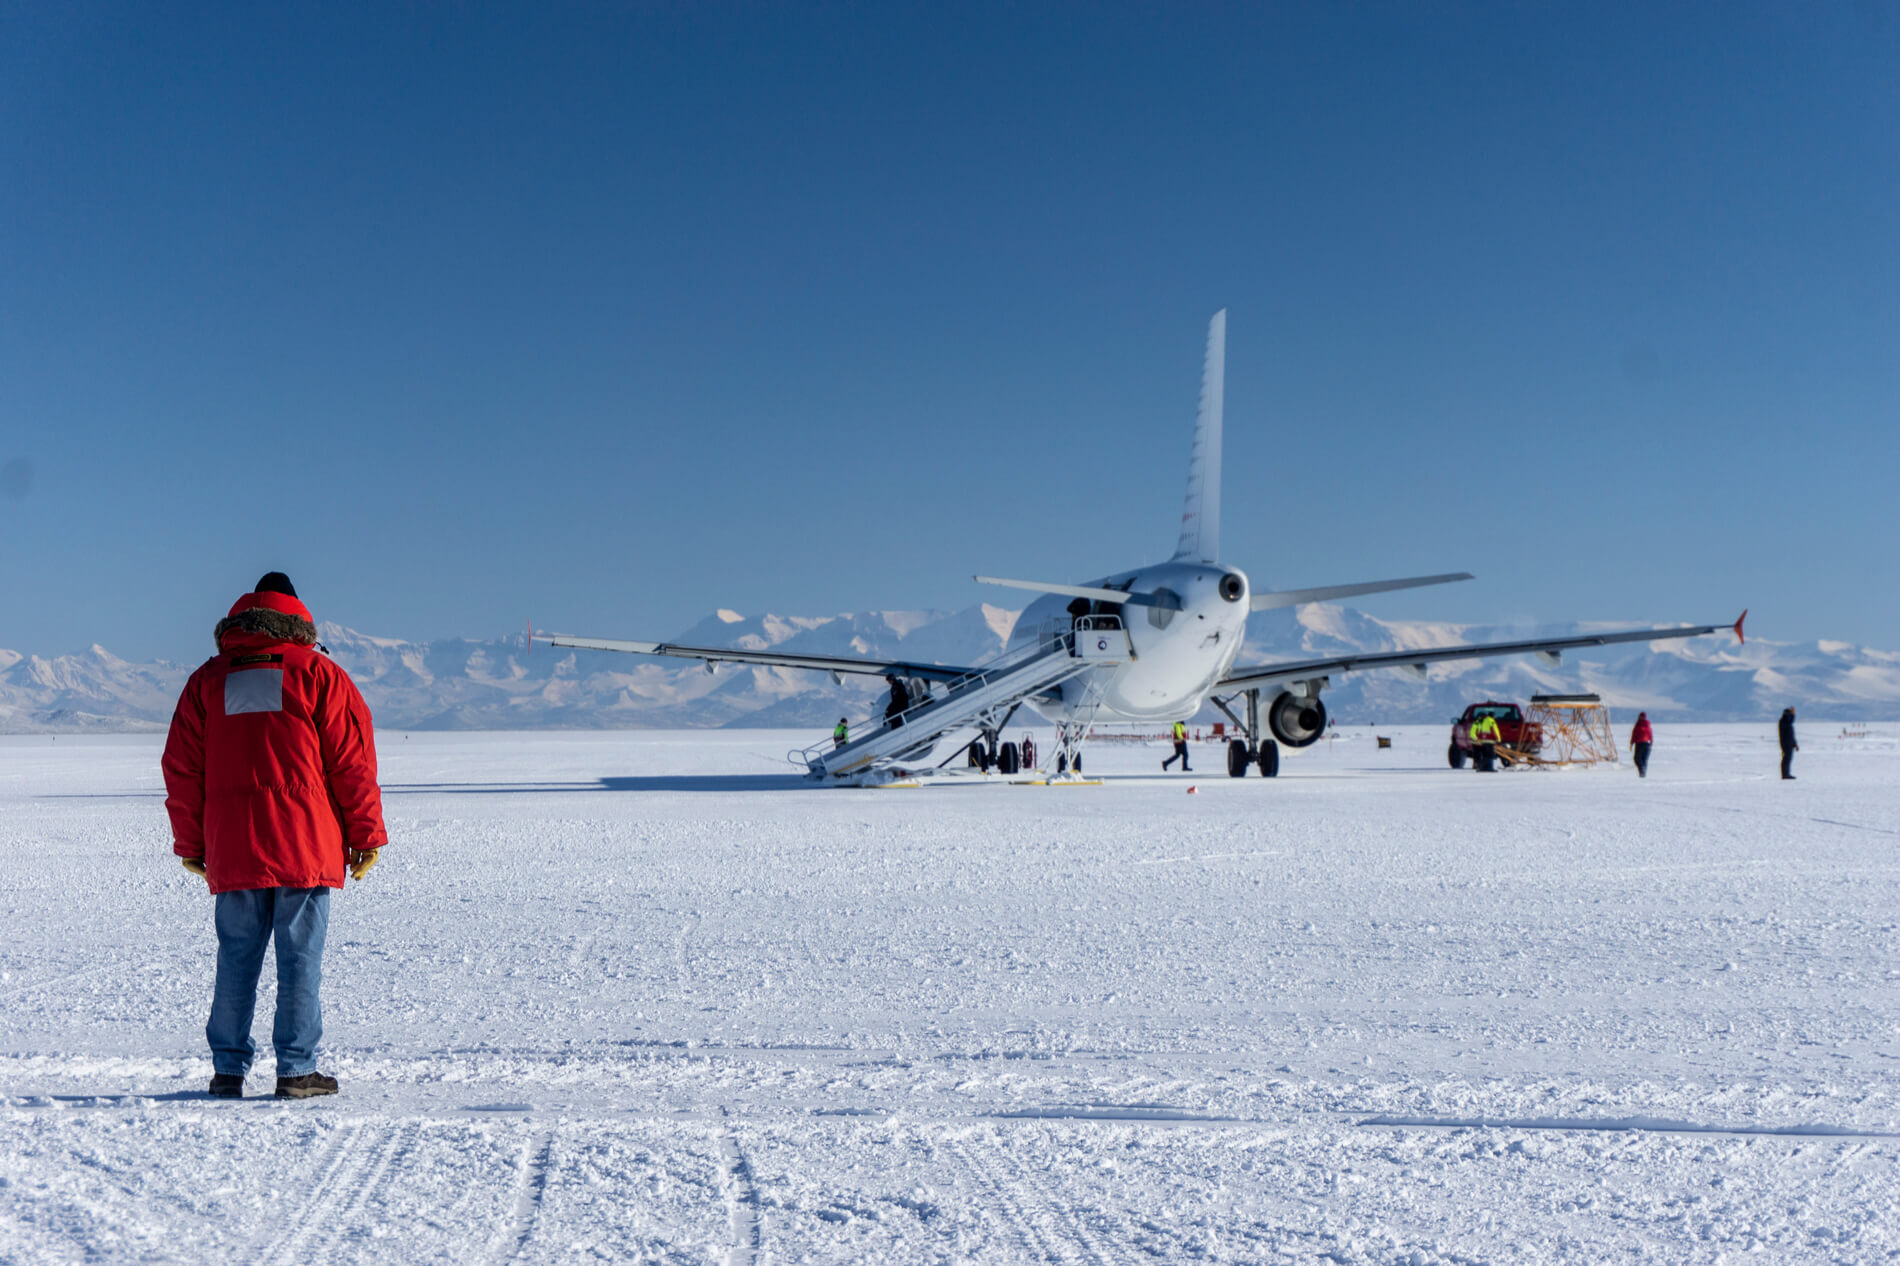 Antarctica airport project: plan and pushback